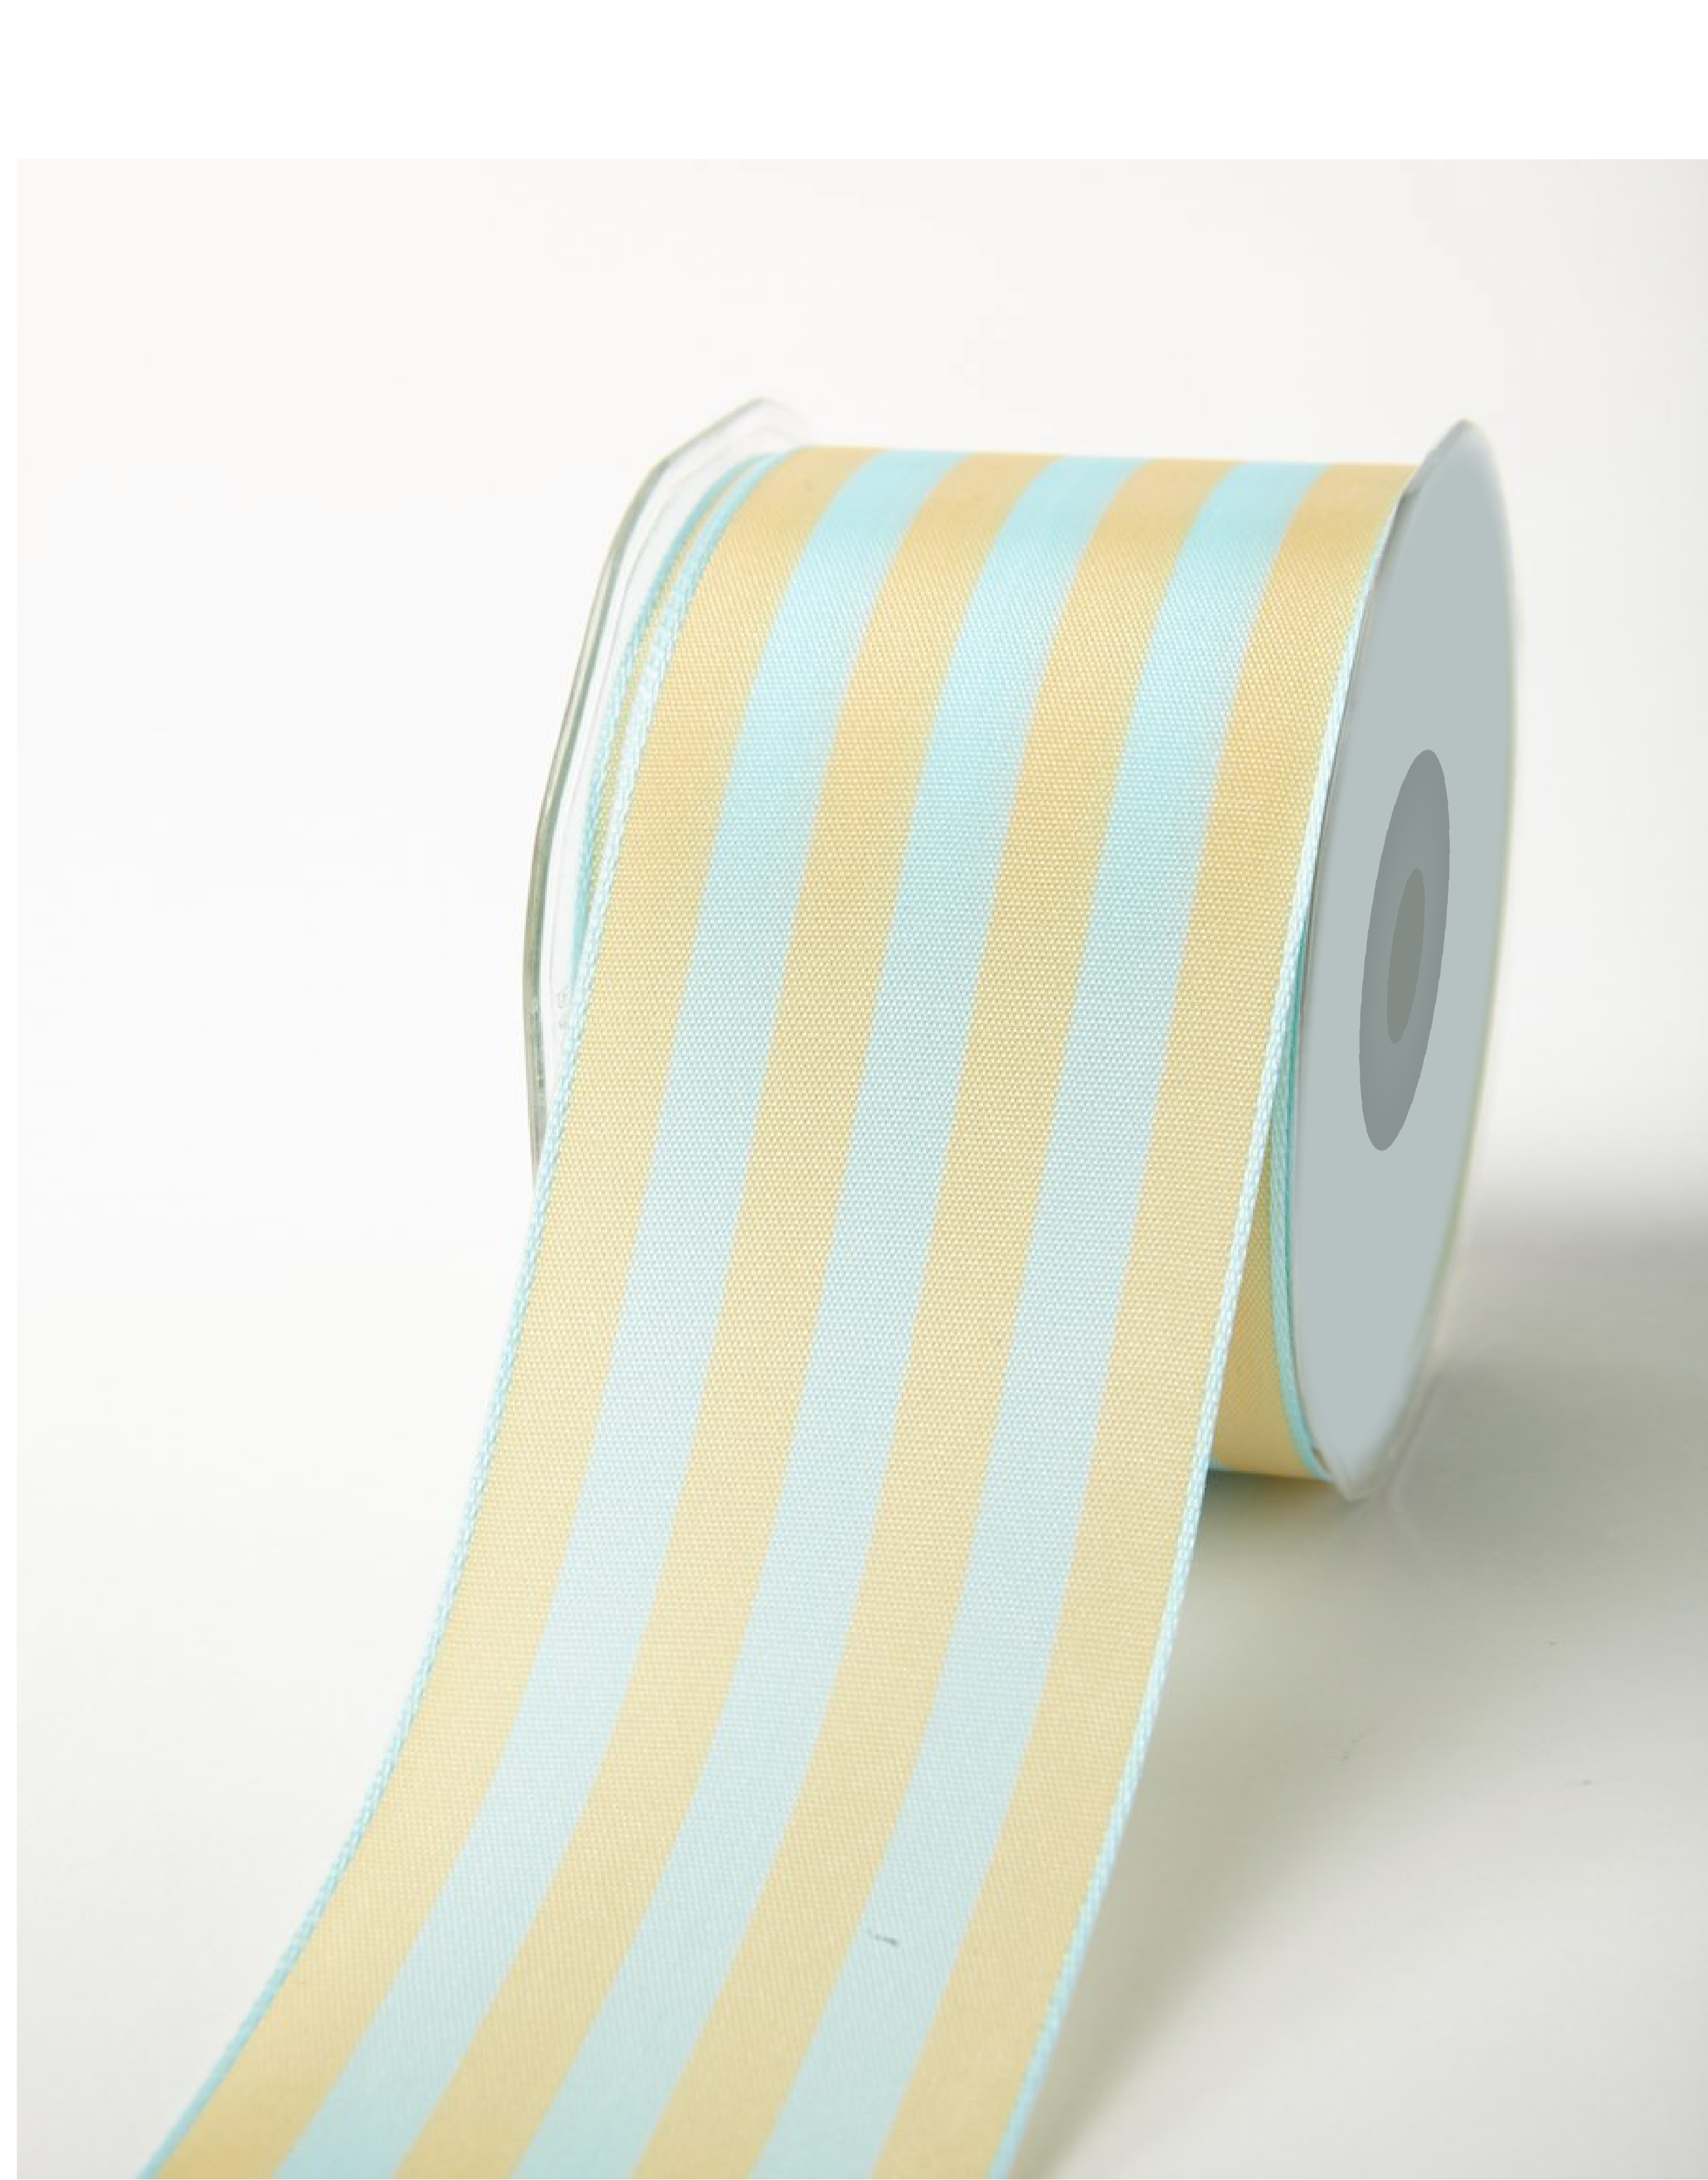 Striped Ribbon with Woven Edge 2", Various Colors